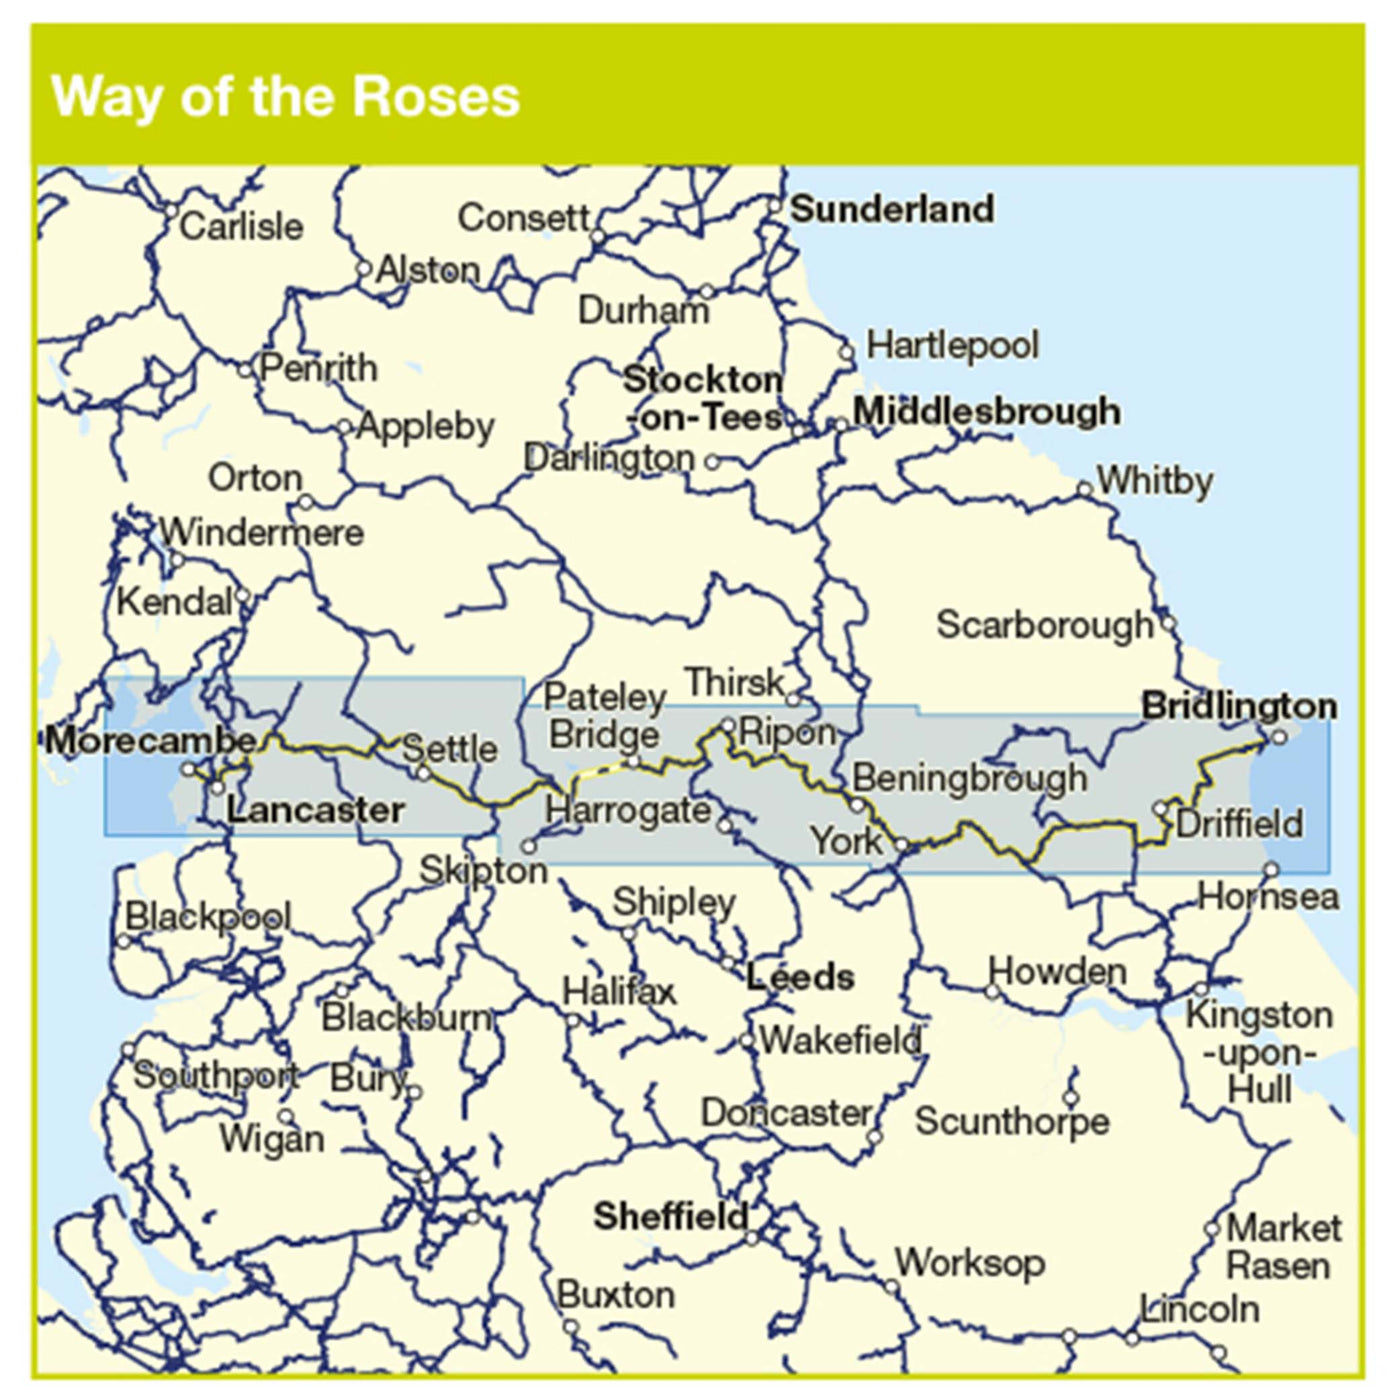 Way of the Roses route coverage 